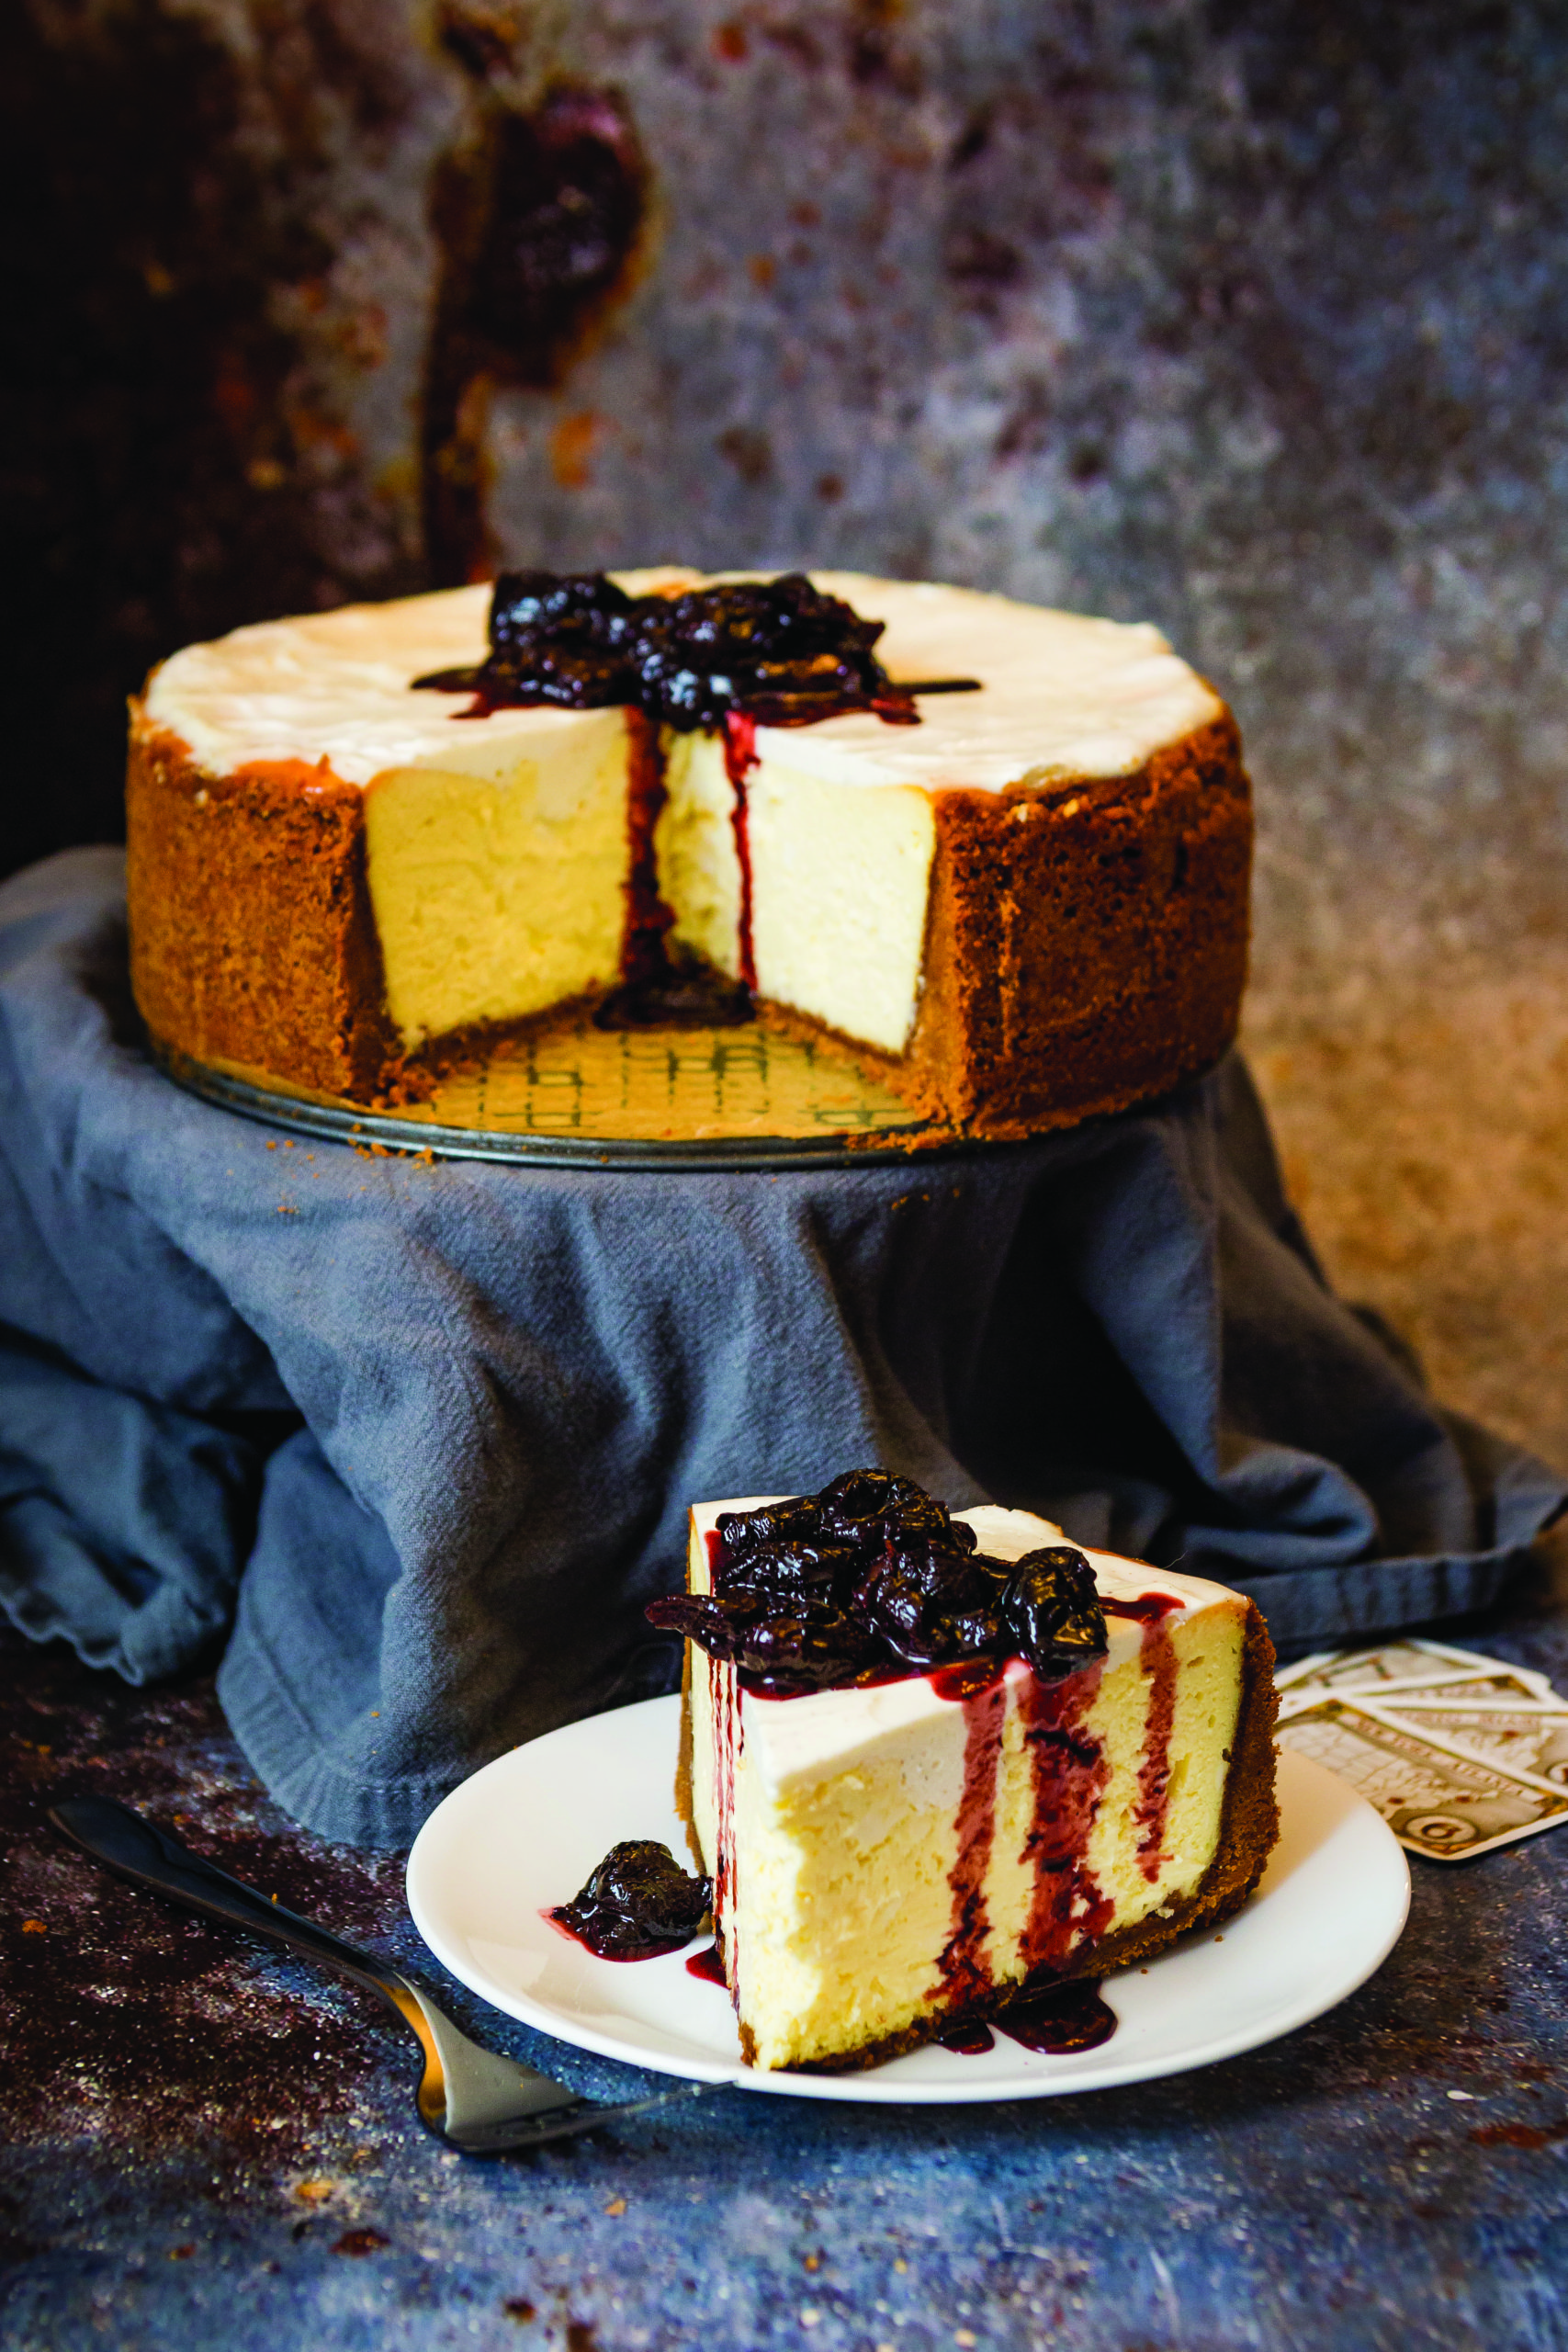 The Ticket to Ride™ Official Cookbook: New York Cheesecake